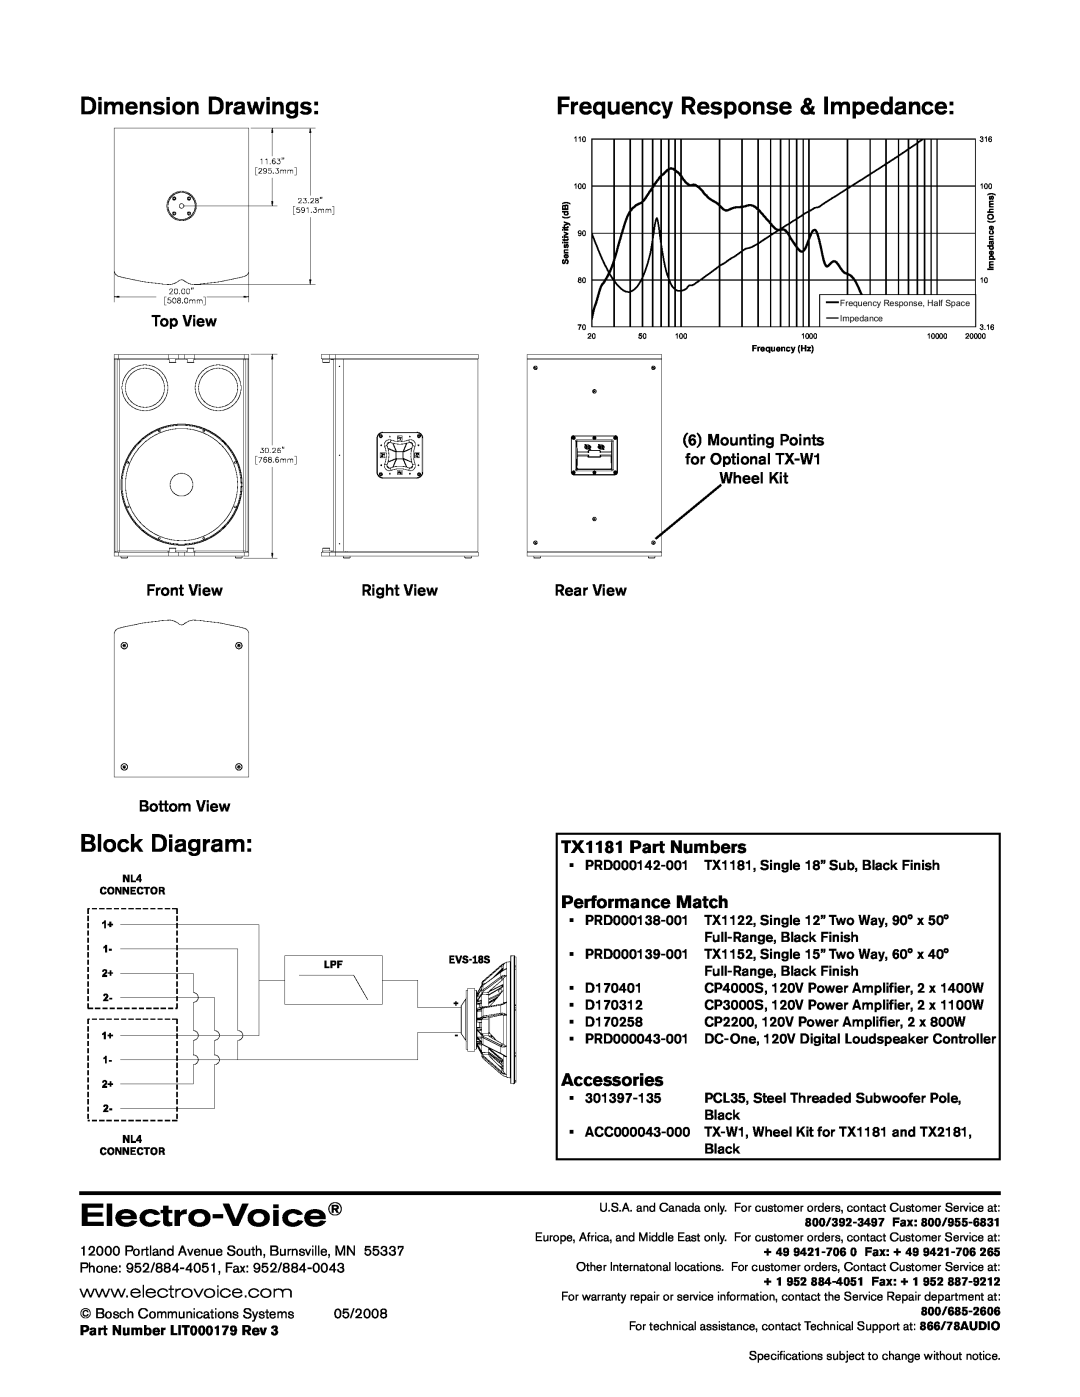 Electro-Voice Dimension Drawings, Frequency Response & Impedance, Block Diagram, Electro-Voice, TX1181 Part Numbers 